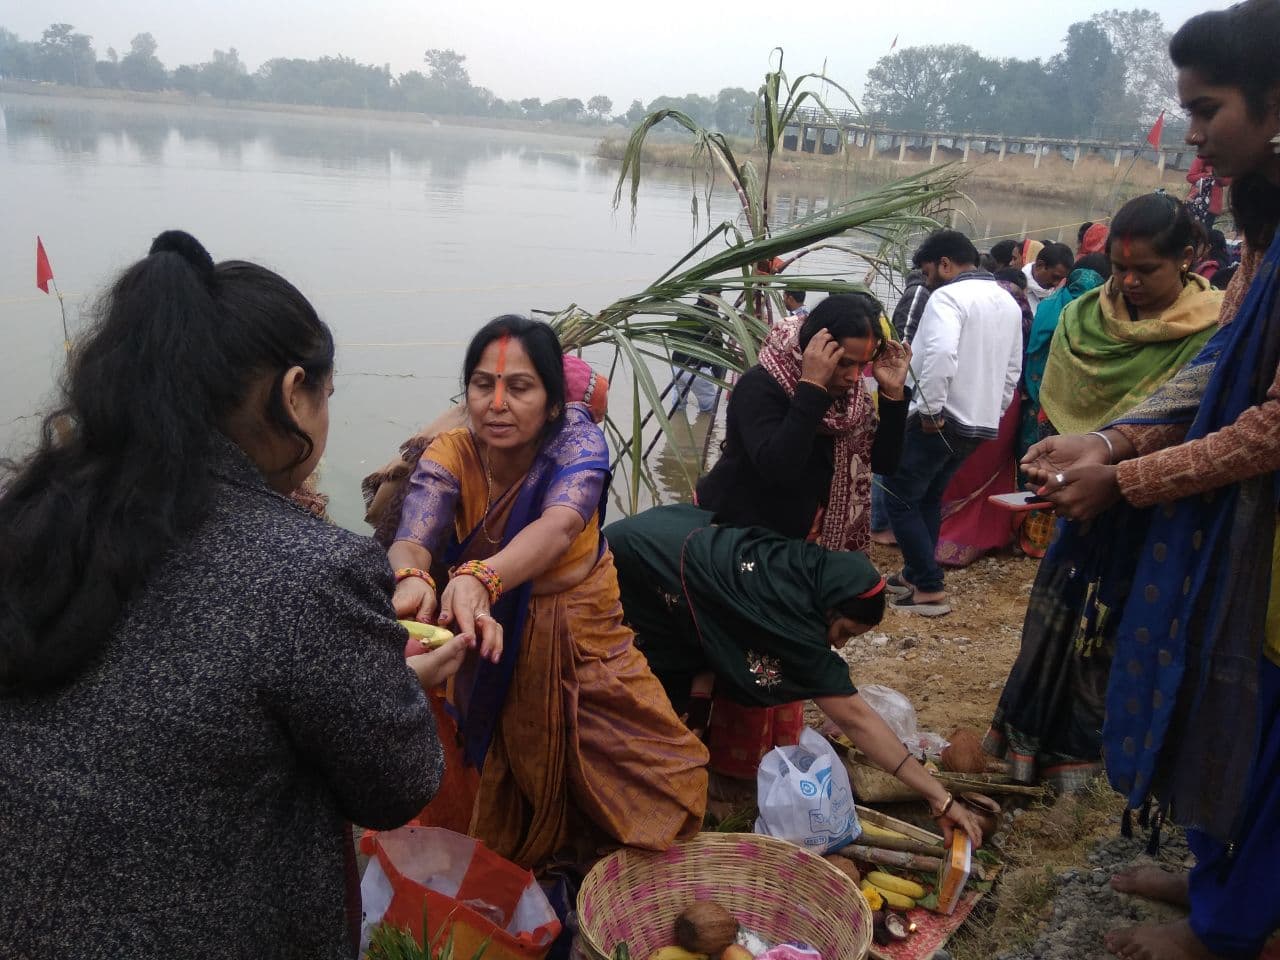 The devotees broke the fast with Paran, since morning the river-pond g